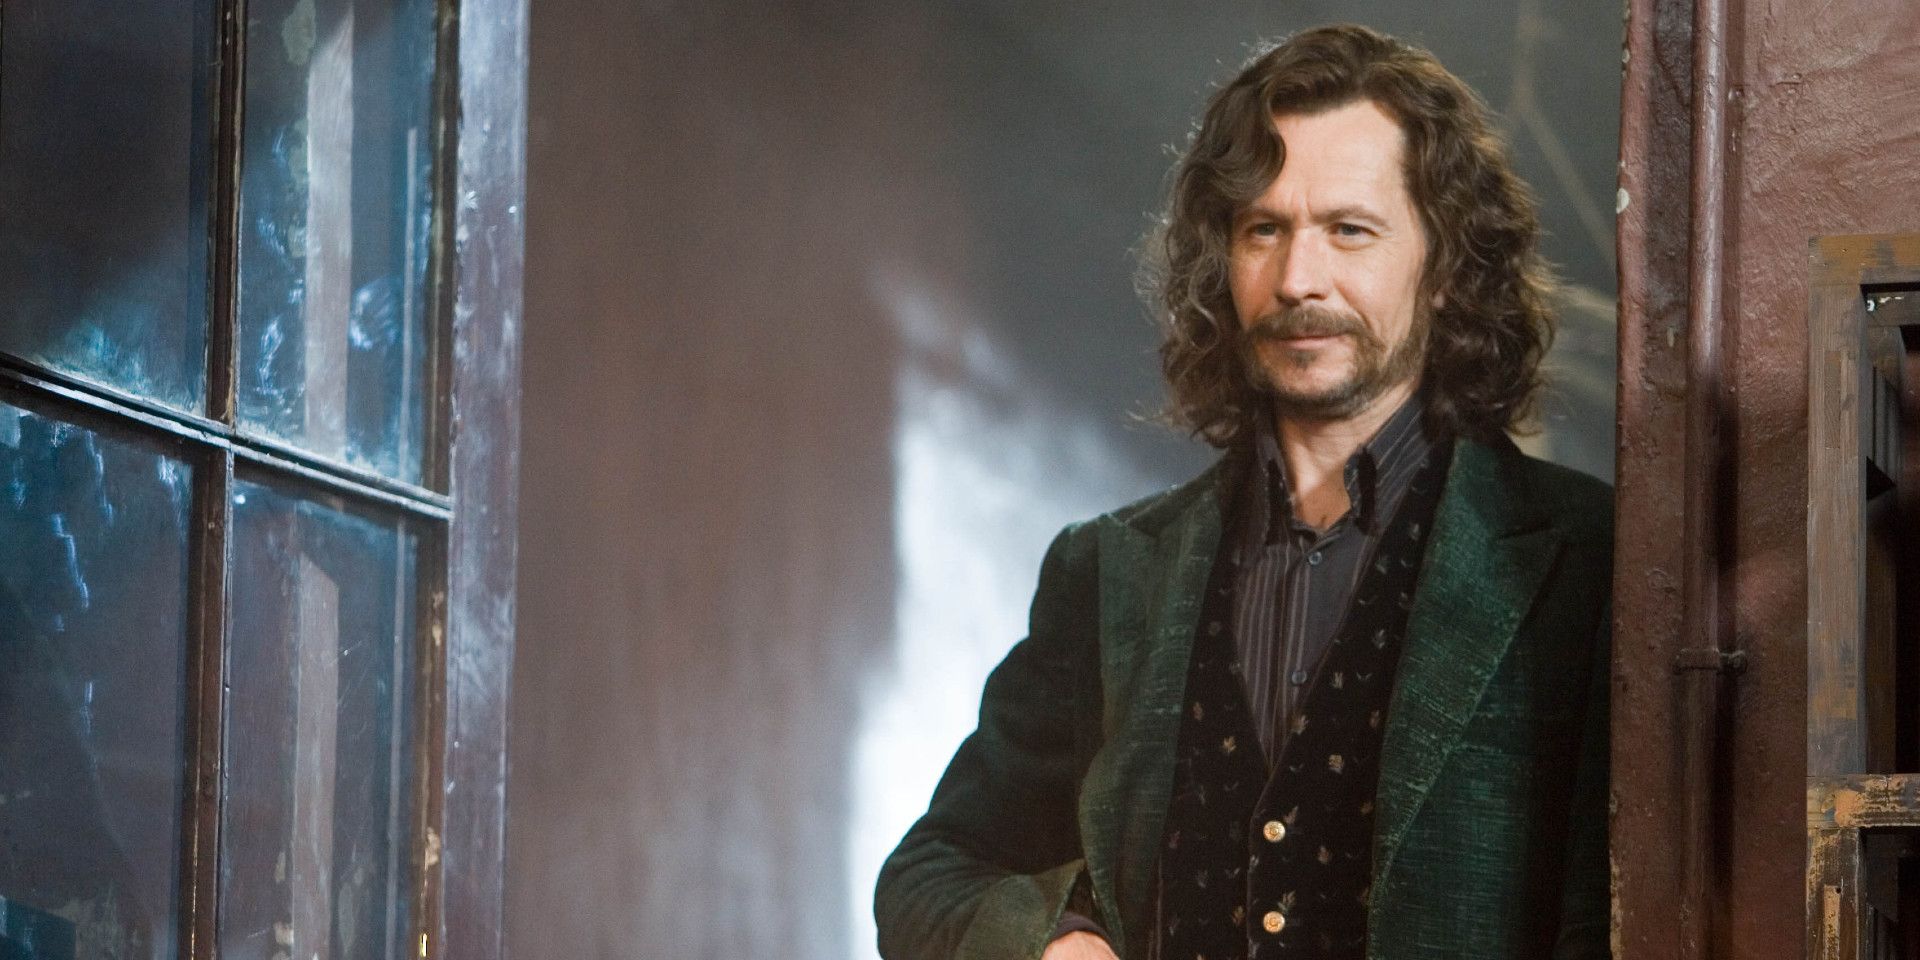 Sirius Black standing in doorway with a cocky smile in Harry Potter